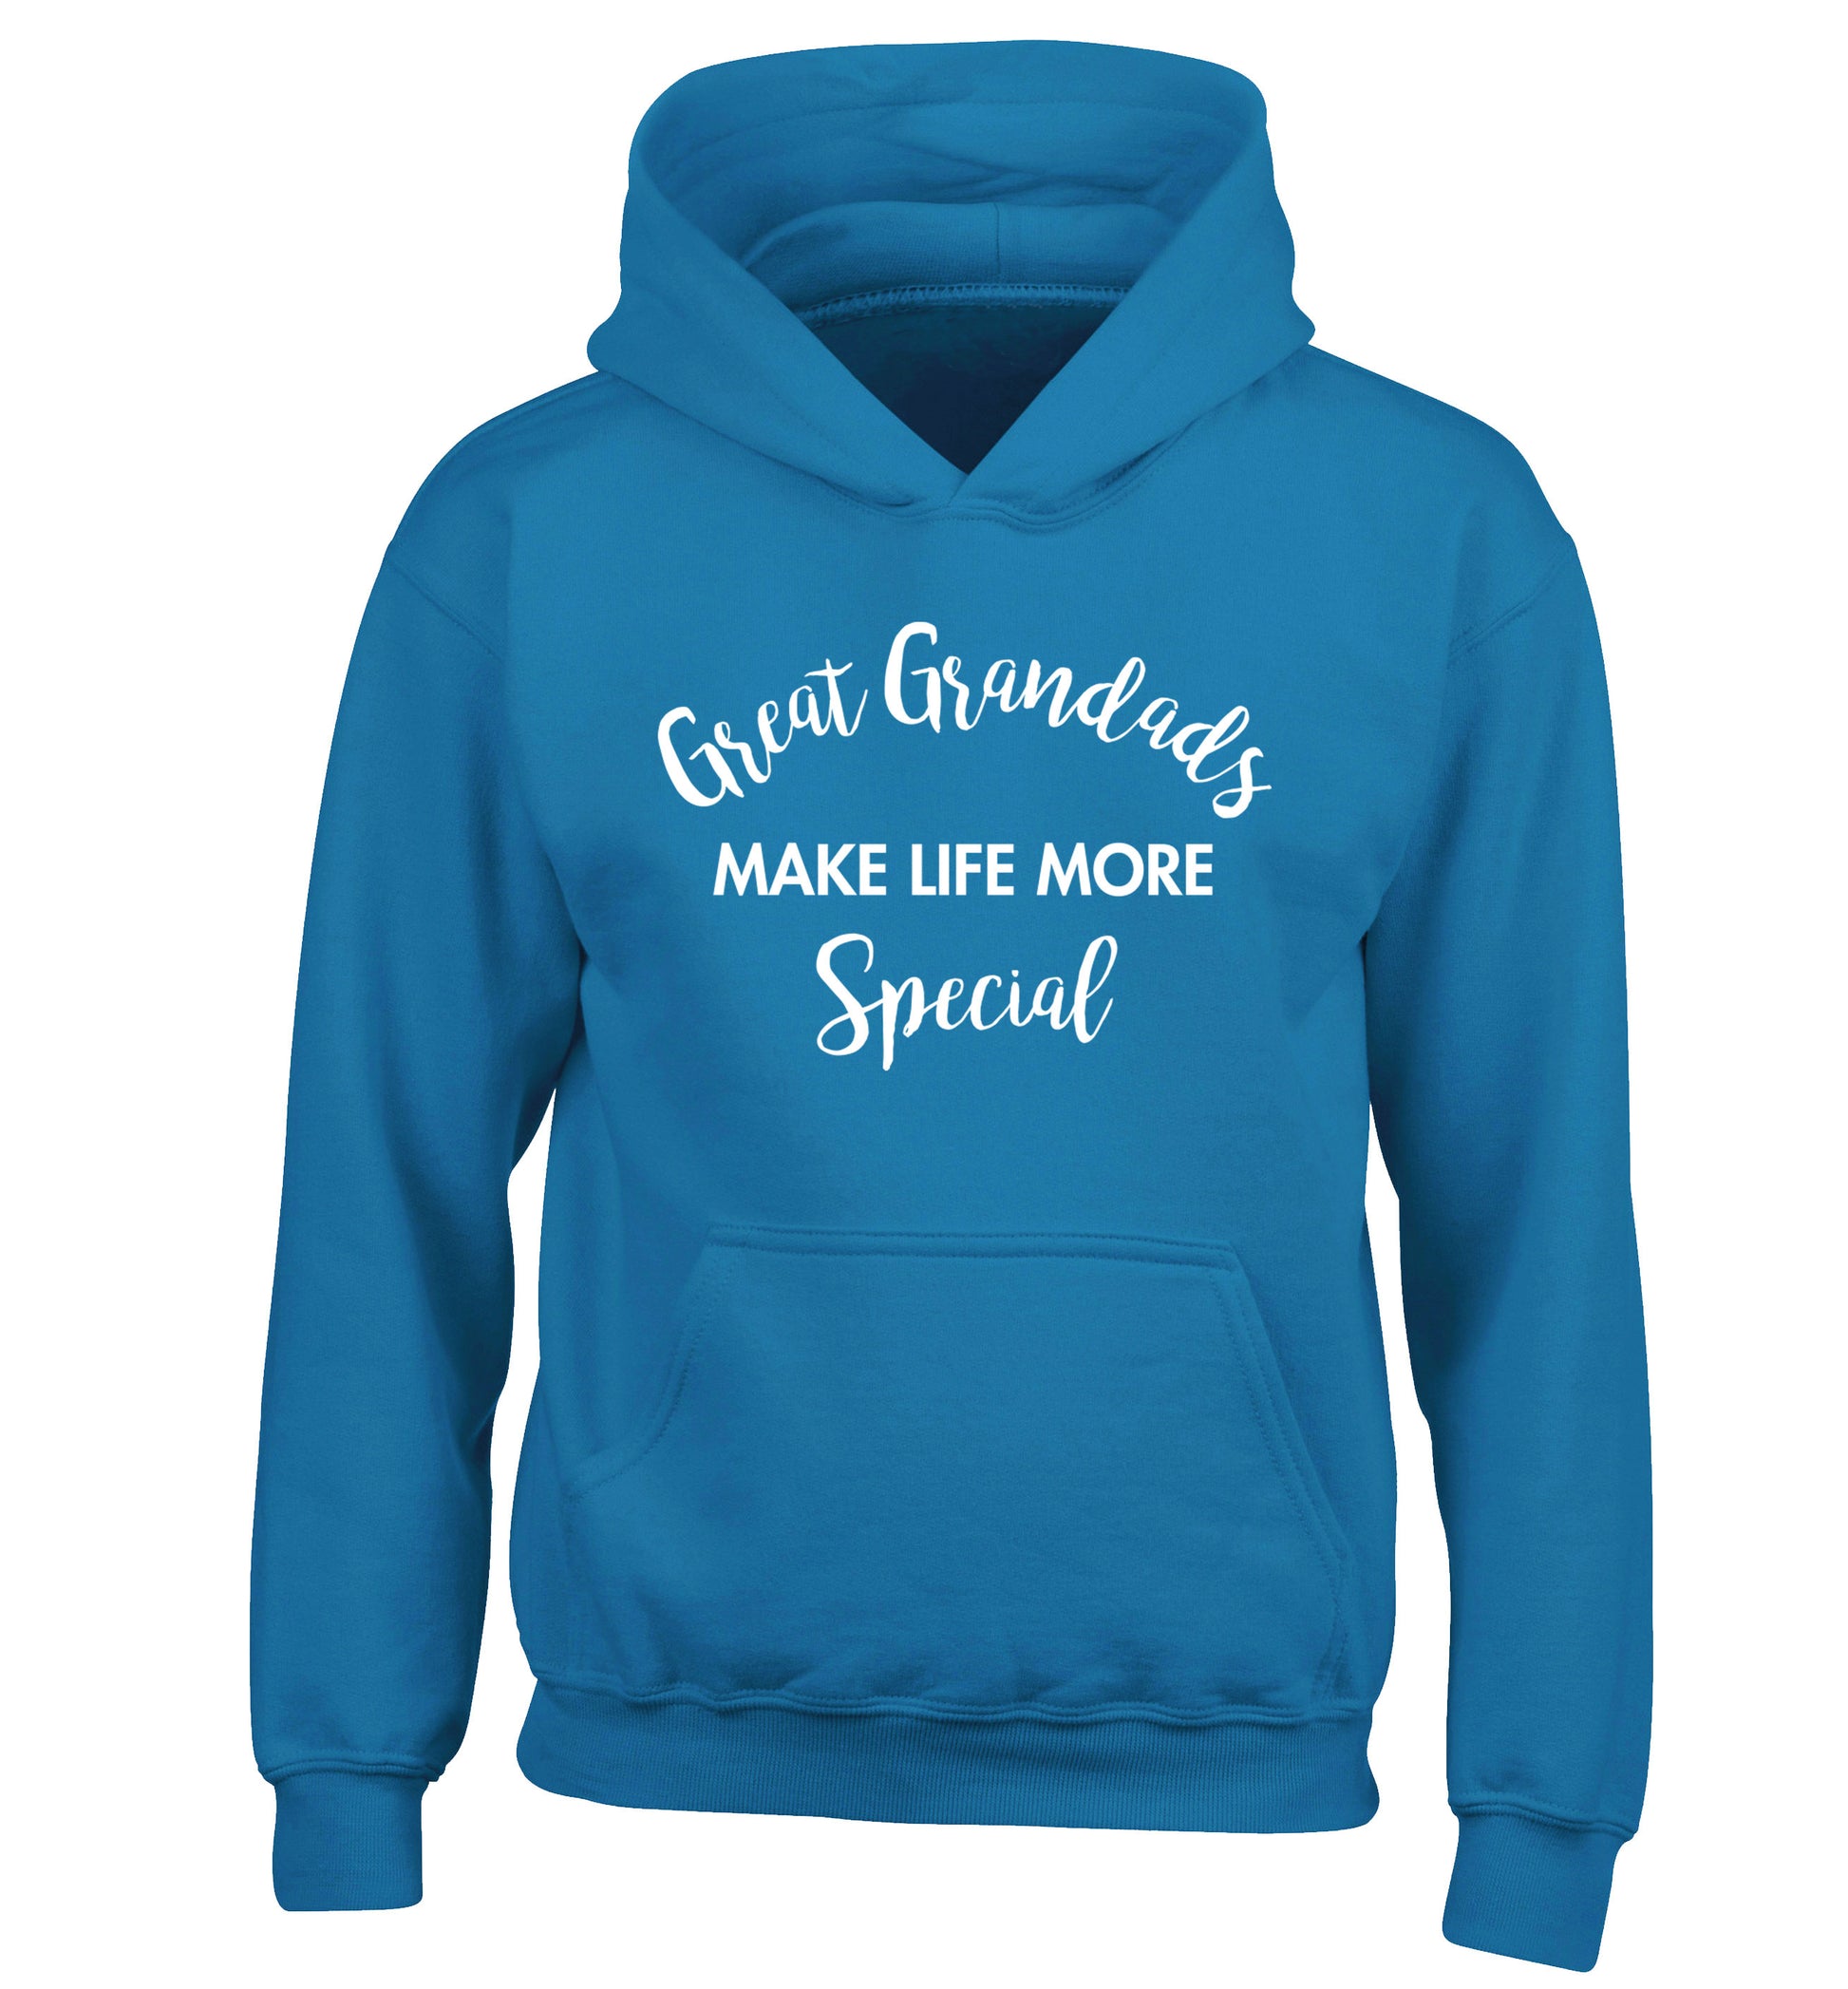 Great Grandads make life more special children's blue hoodie 12-14 Years